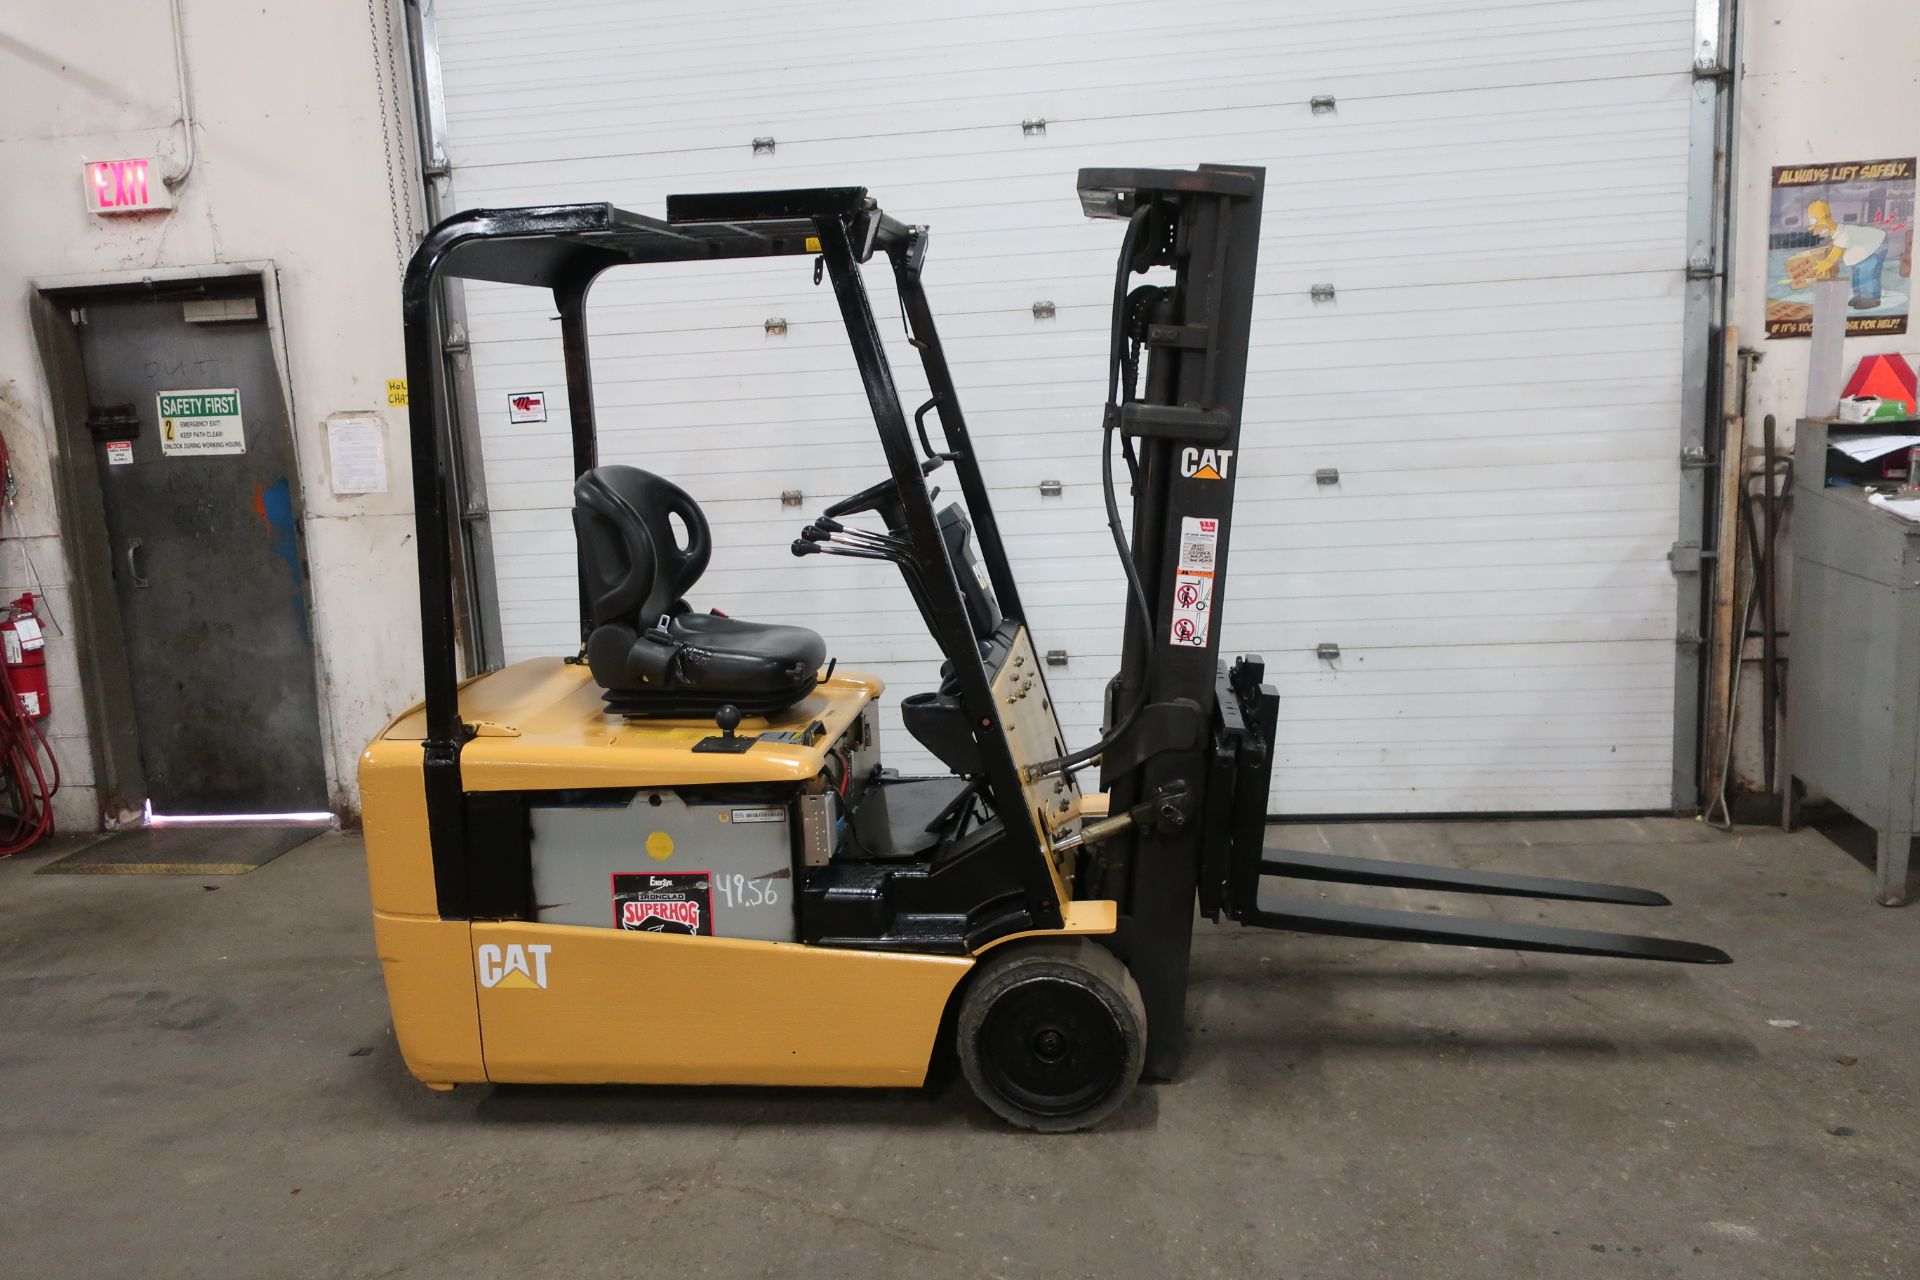 FREE CUSTOMS - CAT 3500lbs Forklift 3-Wheel unit with 3-stage Mast and Sideshift with LOW HOURS